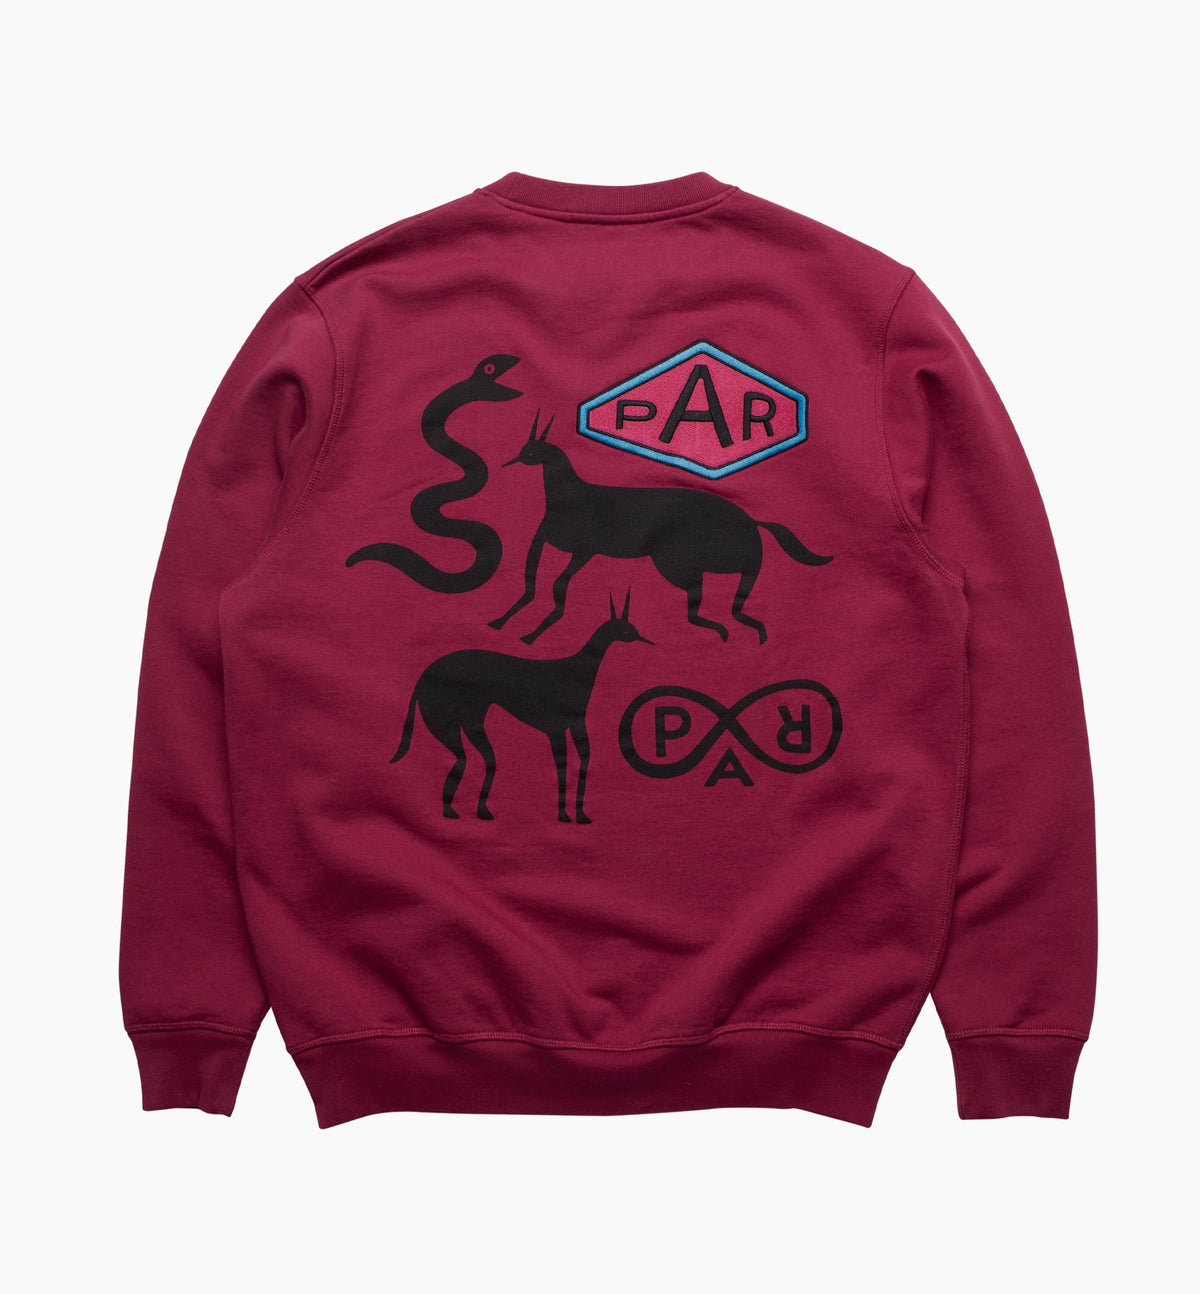 BY PARRA SNAKED BY A HORSE CREW NECK SWEATSHIRT